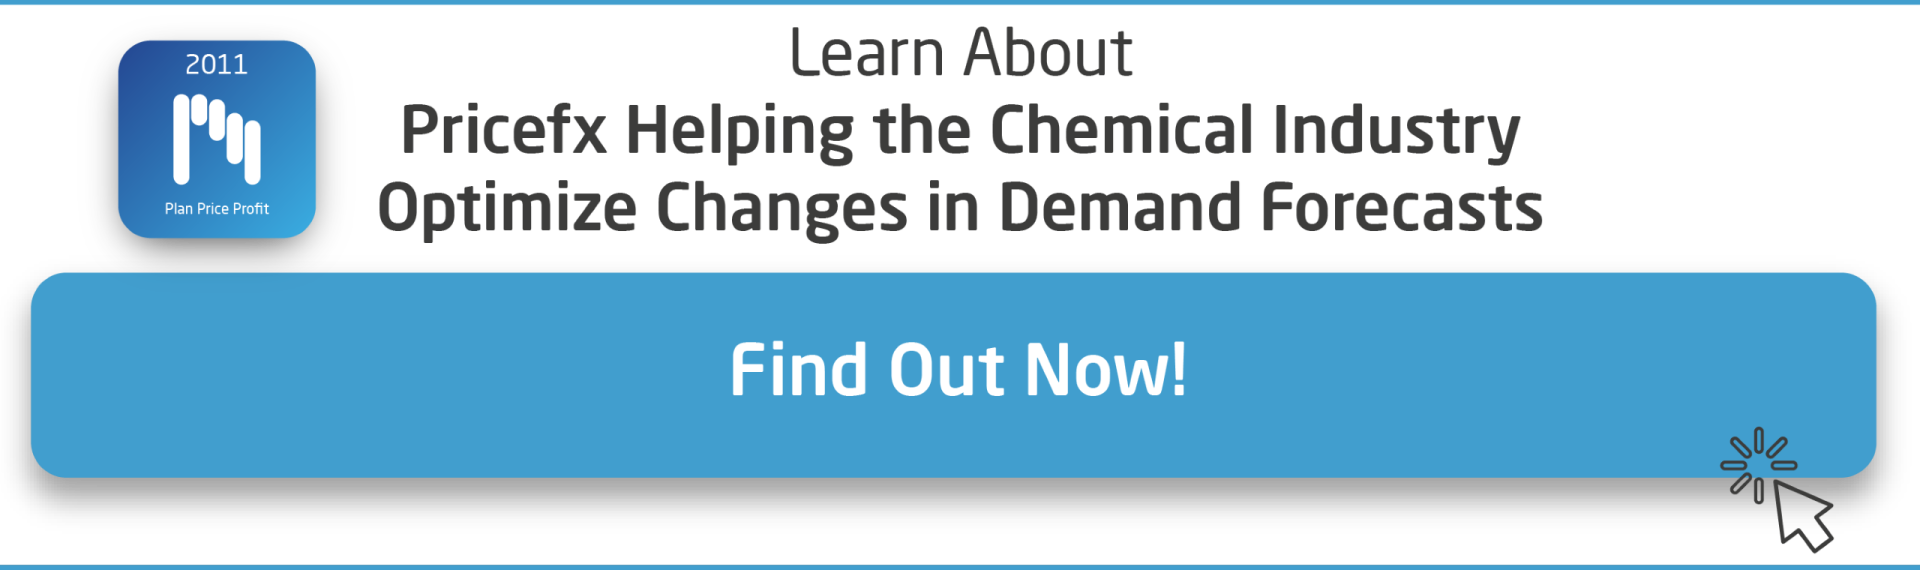 CTA-Pricefx-and-helping-chemical-companies-optimize-changes-in-demand-forecasts